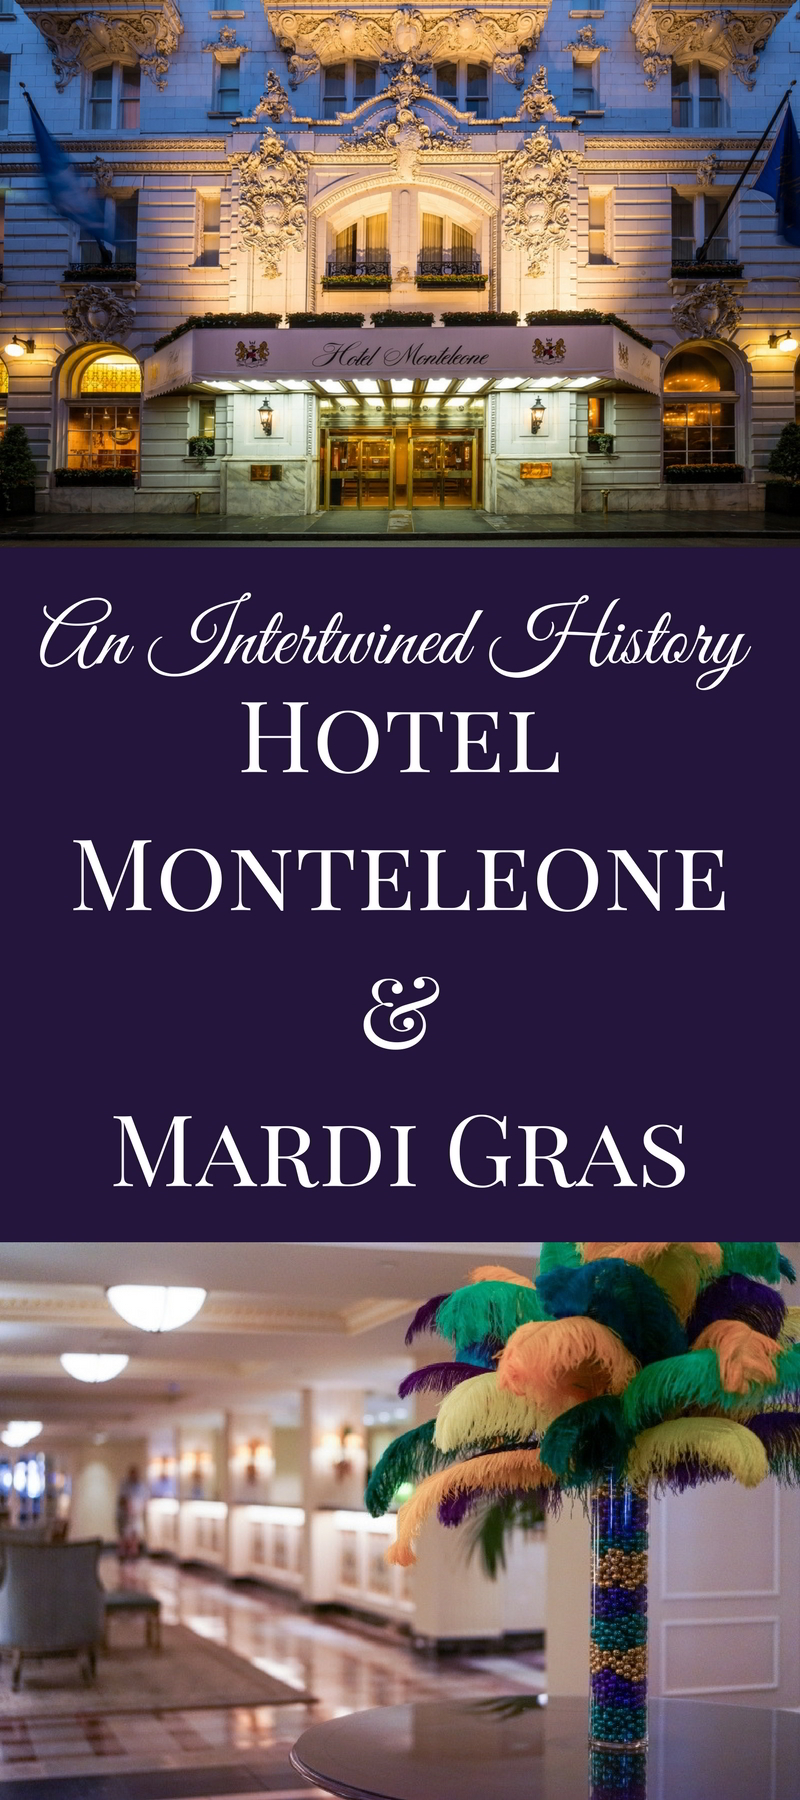 What do the French Quarter and a Sicilian immigrant have in common? Learn more about the deeply intertwined history of Hotel Monteleone and Mardi Gras.